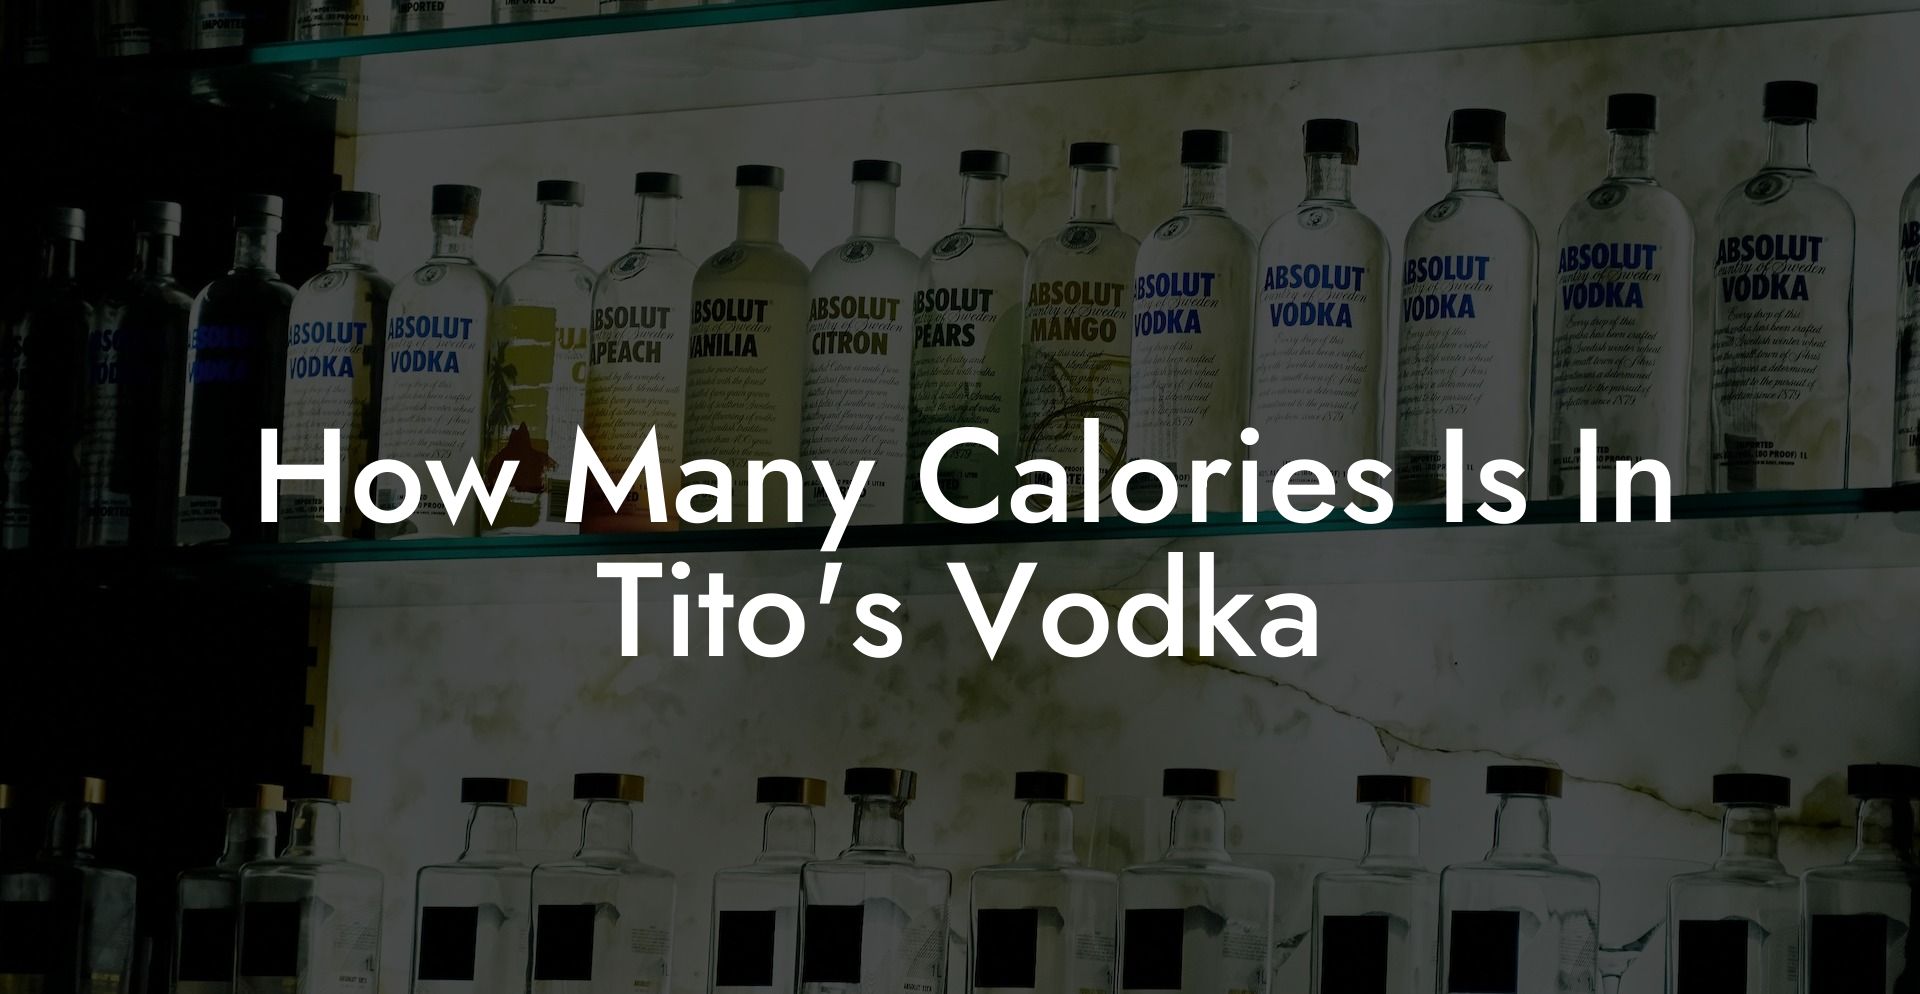 How Many Calories Is In Tito's Vodka